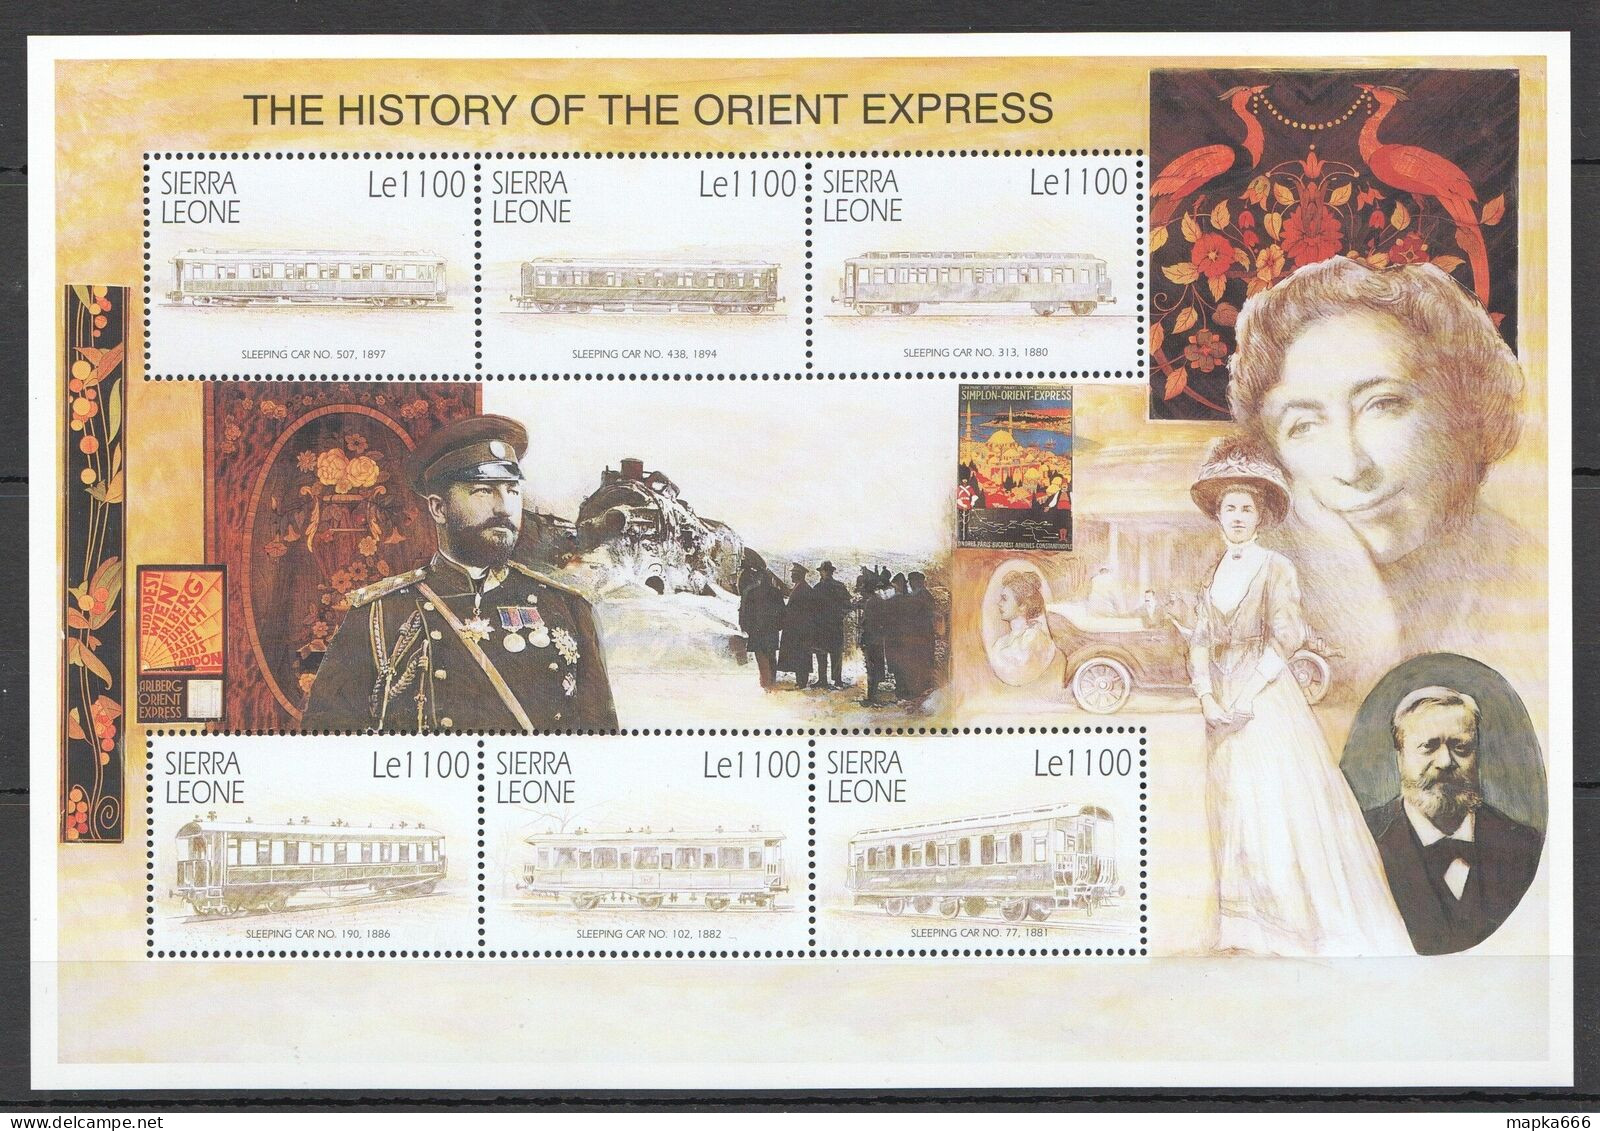 B1538 Sierra Leone Transport Trains The History Of The Orient Express Sh Mnh - Trains